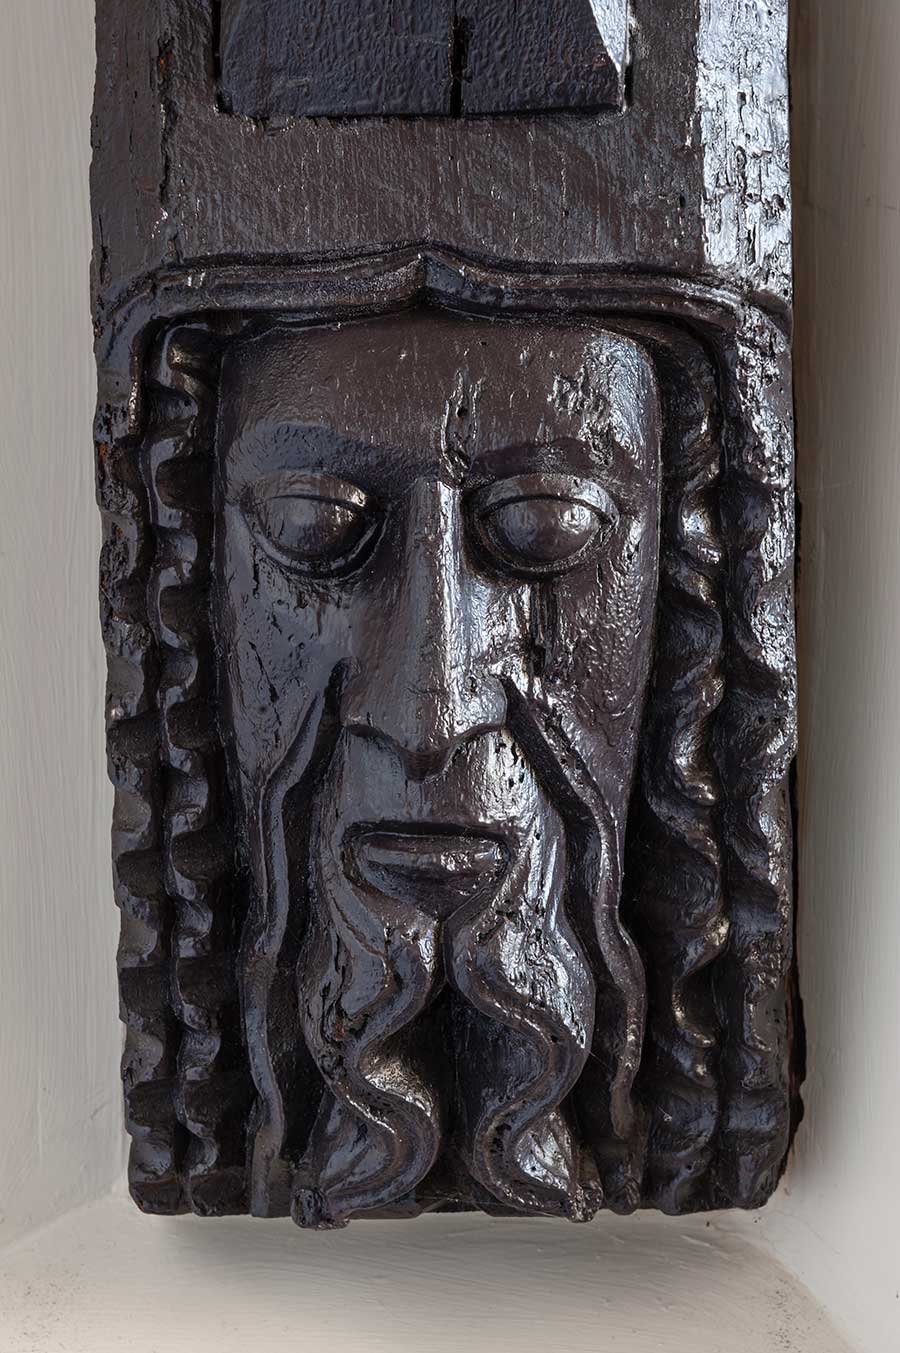 One of the carved heads supporting the chapel roof.